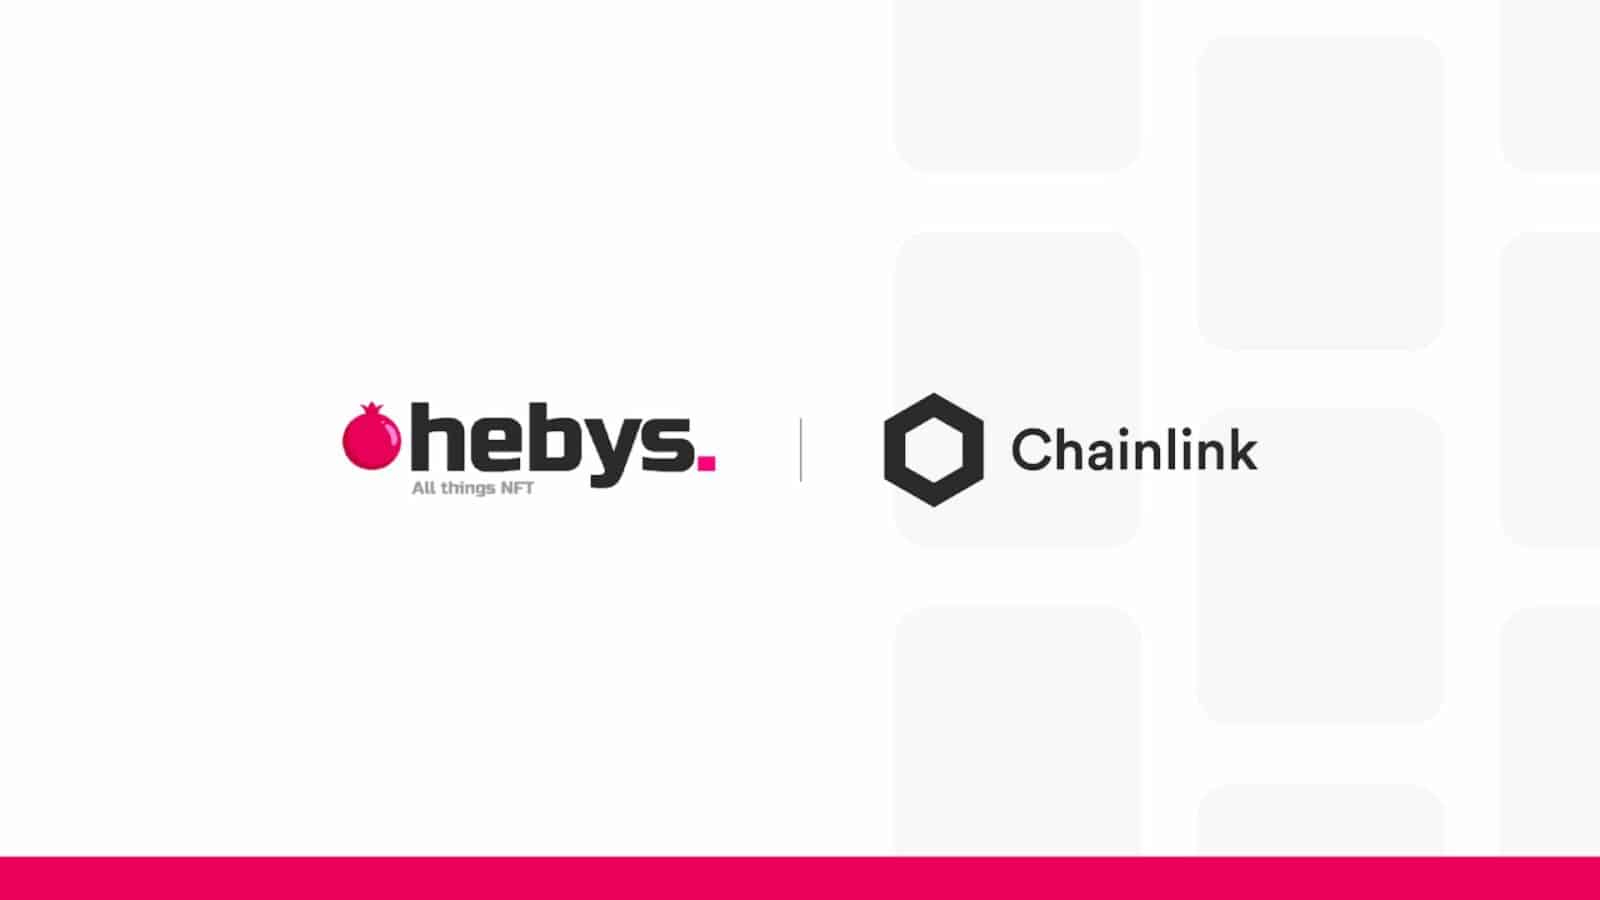 Hebys NFT Search Engine & Marketplace Integrates Chainlink VRF to Help Power Fair NFT Distributions